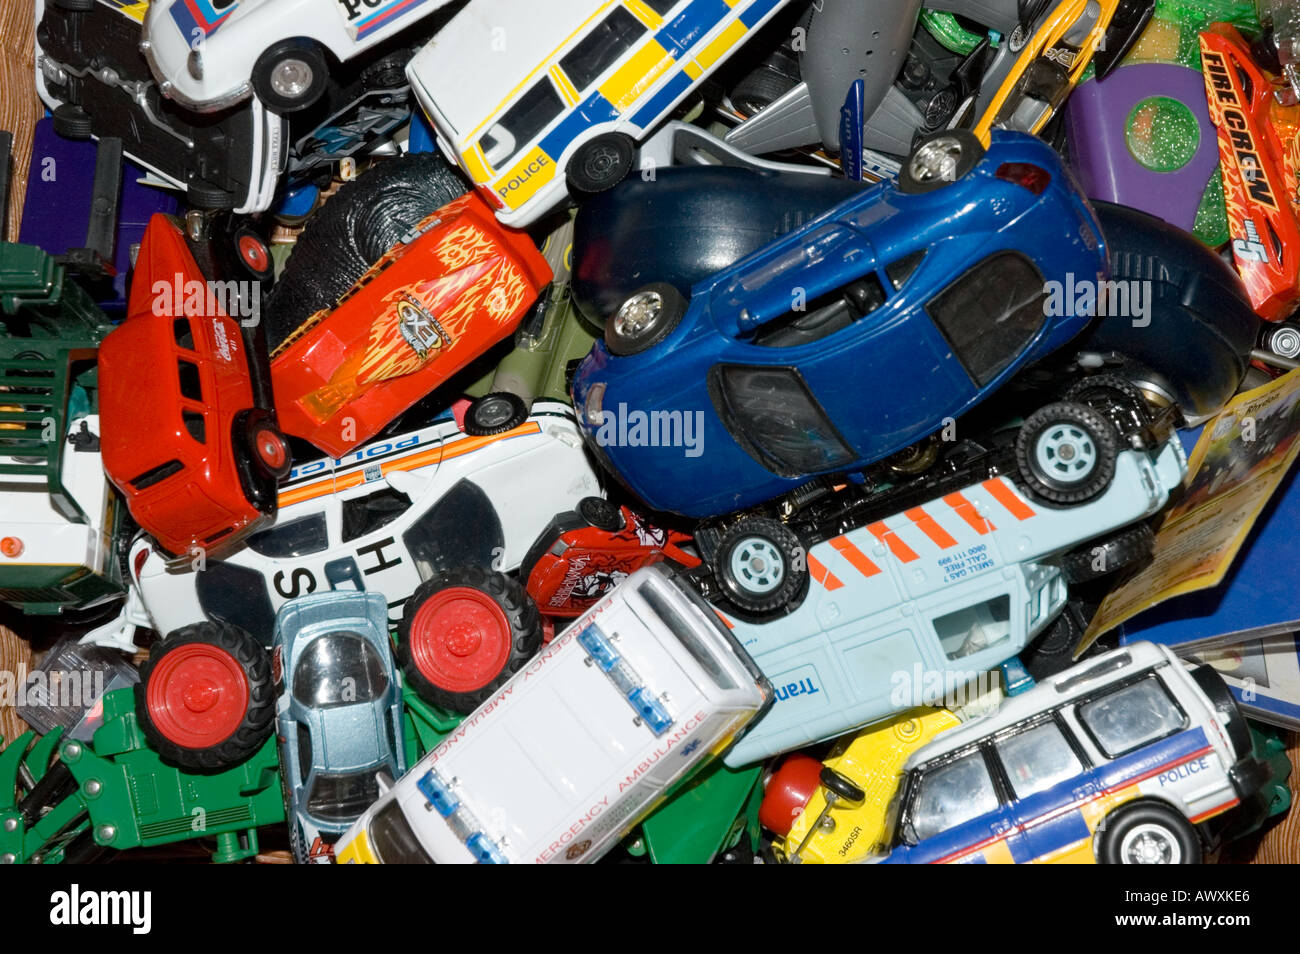 A box of toy cars showing an assortment of models Stock Photo